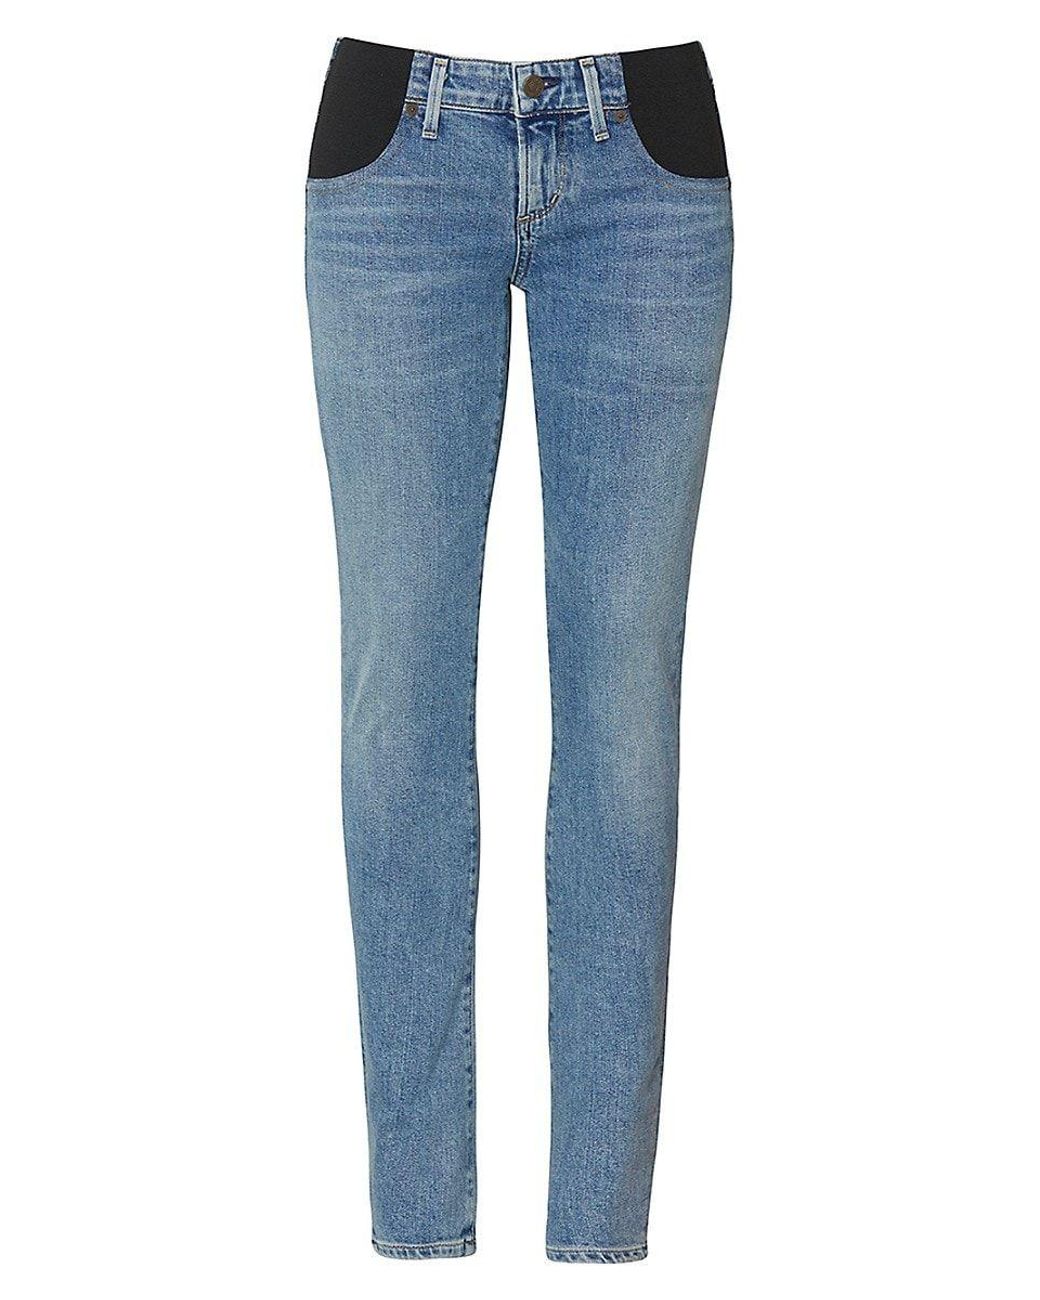 Citizens of Humanity Skinny Fit Whiskered Maternity Jeans in Blue | Lyst